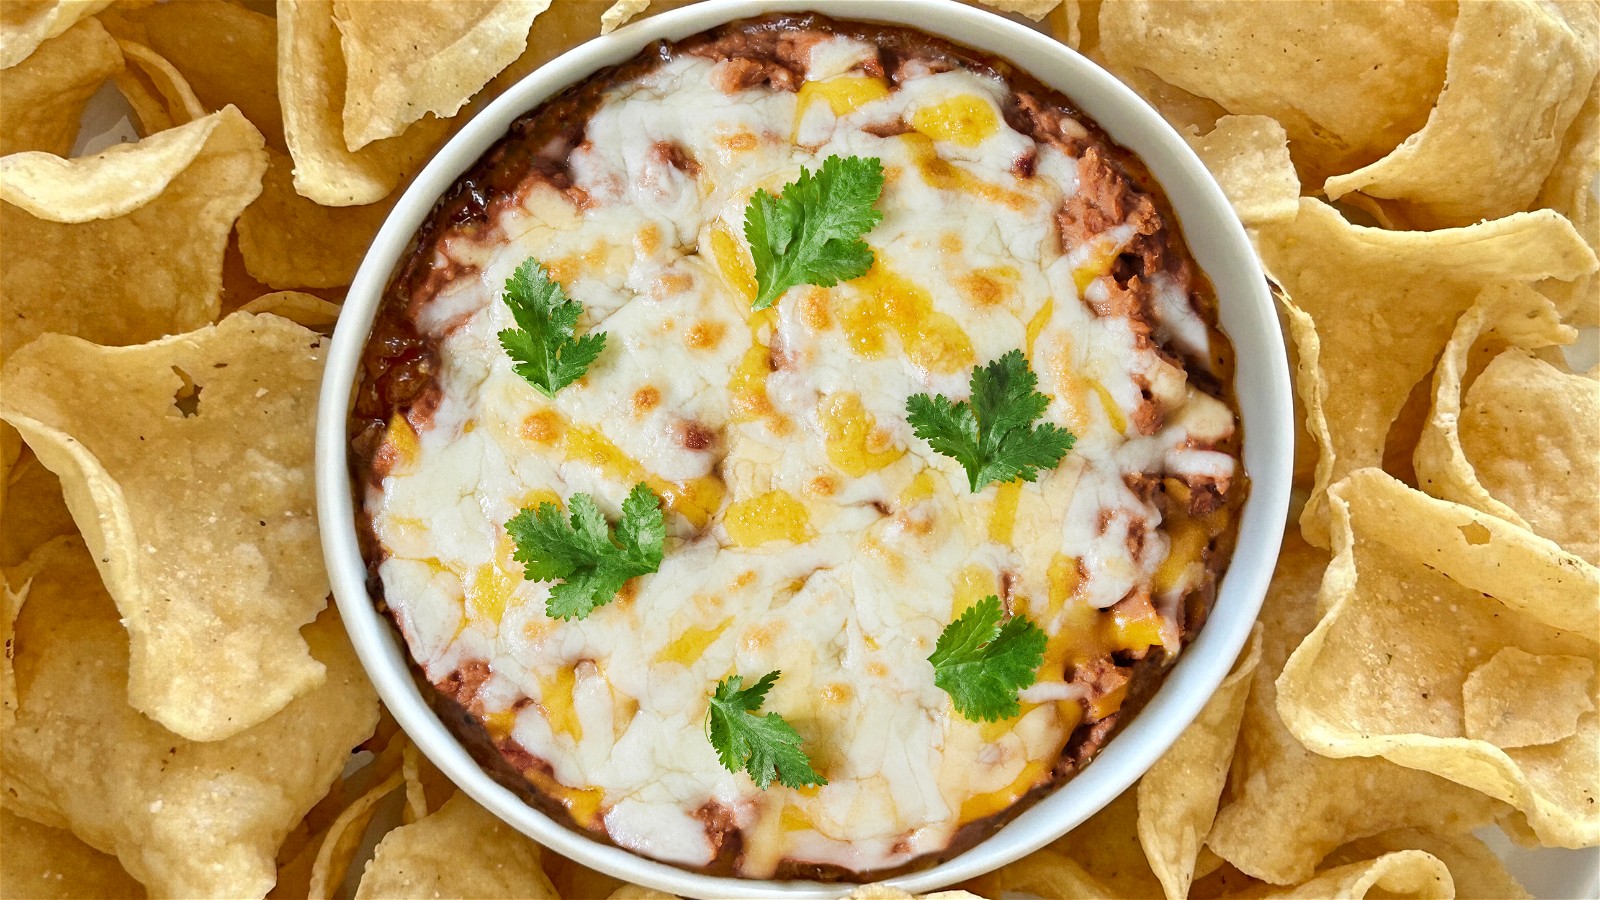 Image of Sloppy Queso Fundido